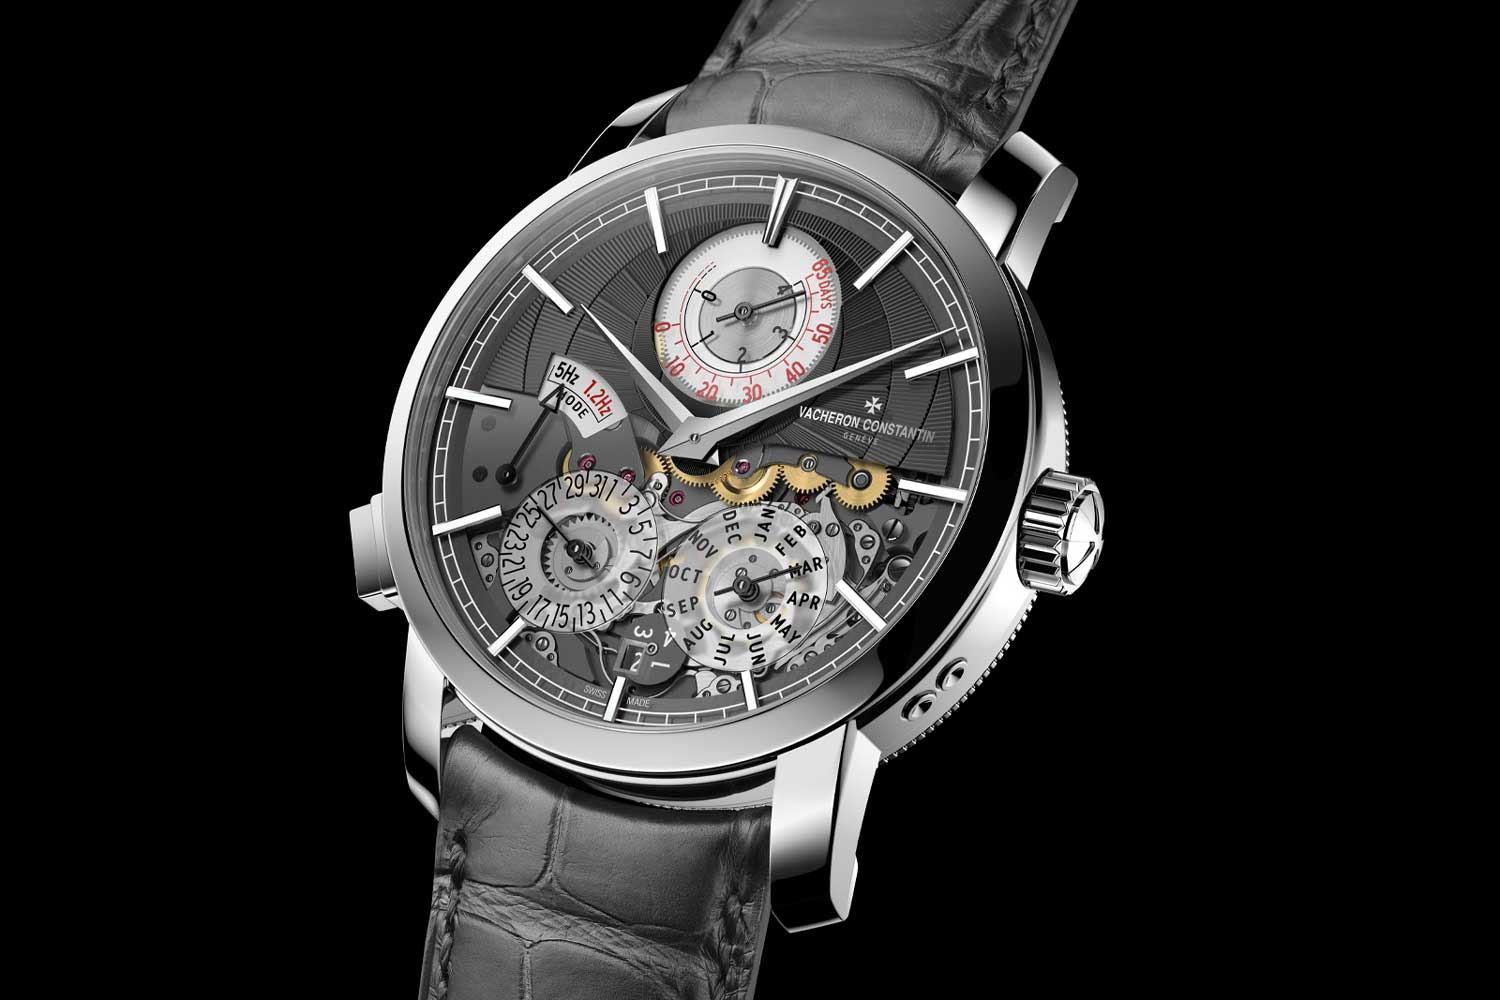 The Vacheron Constantin Traditionnelle Twin Beat Perpetual Calendar with dual wheel trains and oscillators, each dedicated to a different mode, accomplishing a 65-day power reserve on standby